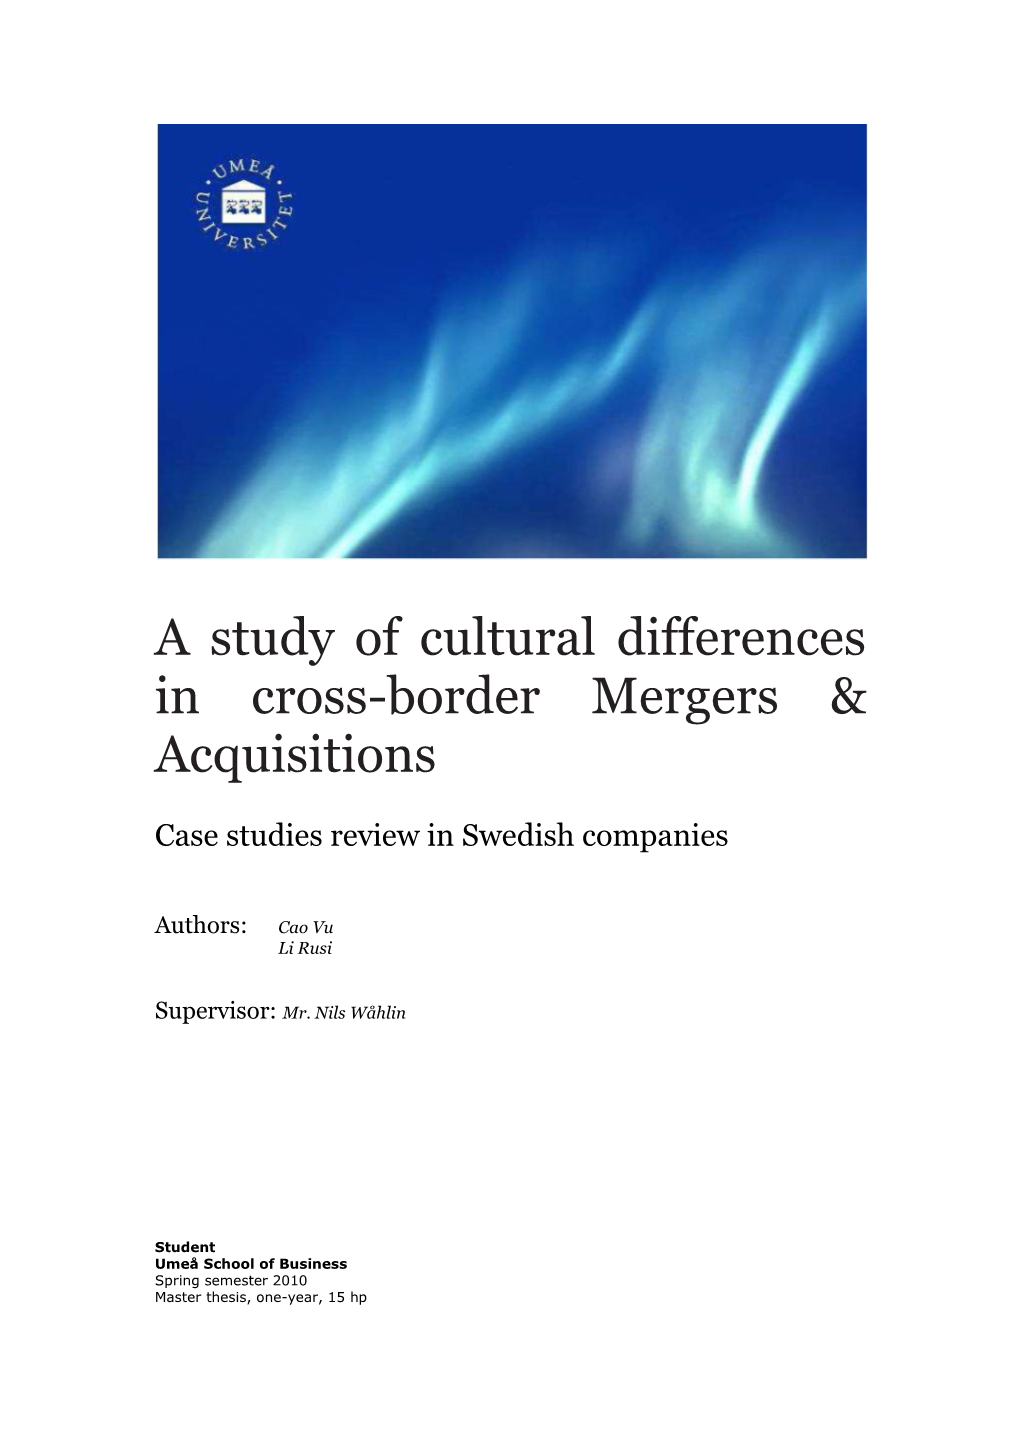 A Study of Cultural Differences in Cross-Border Mergers & Acquisitions